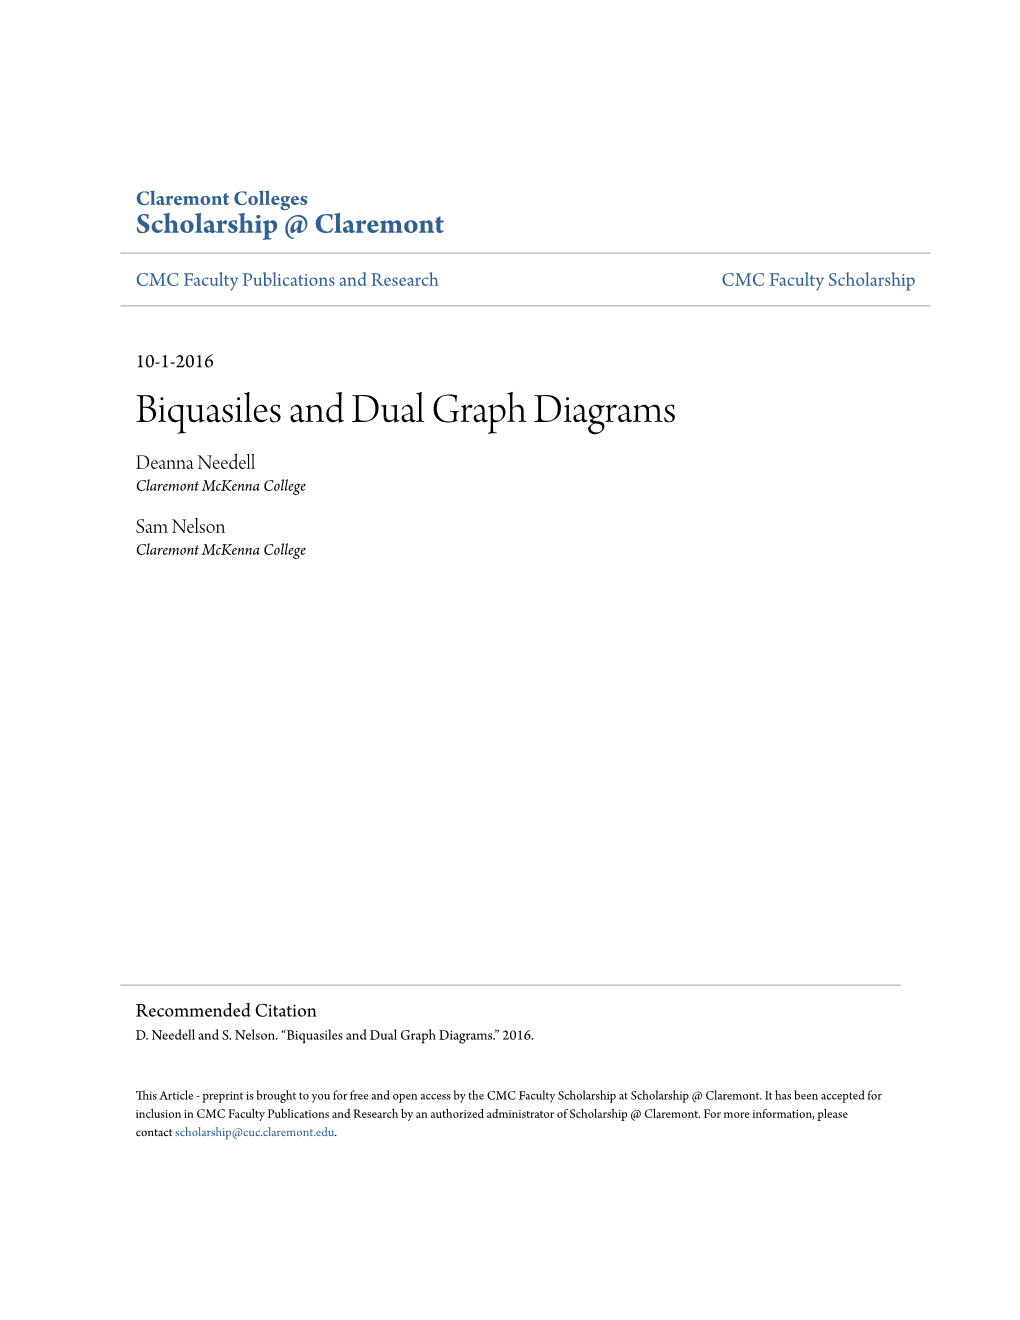 Biquasiles and Dual Graph Diagrams Deanna Needell Claremont Mckenna College